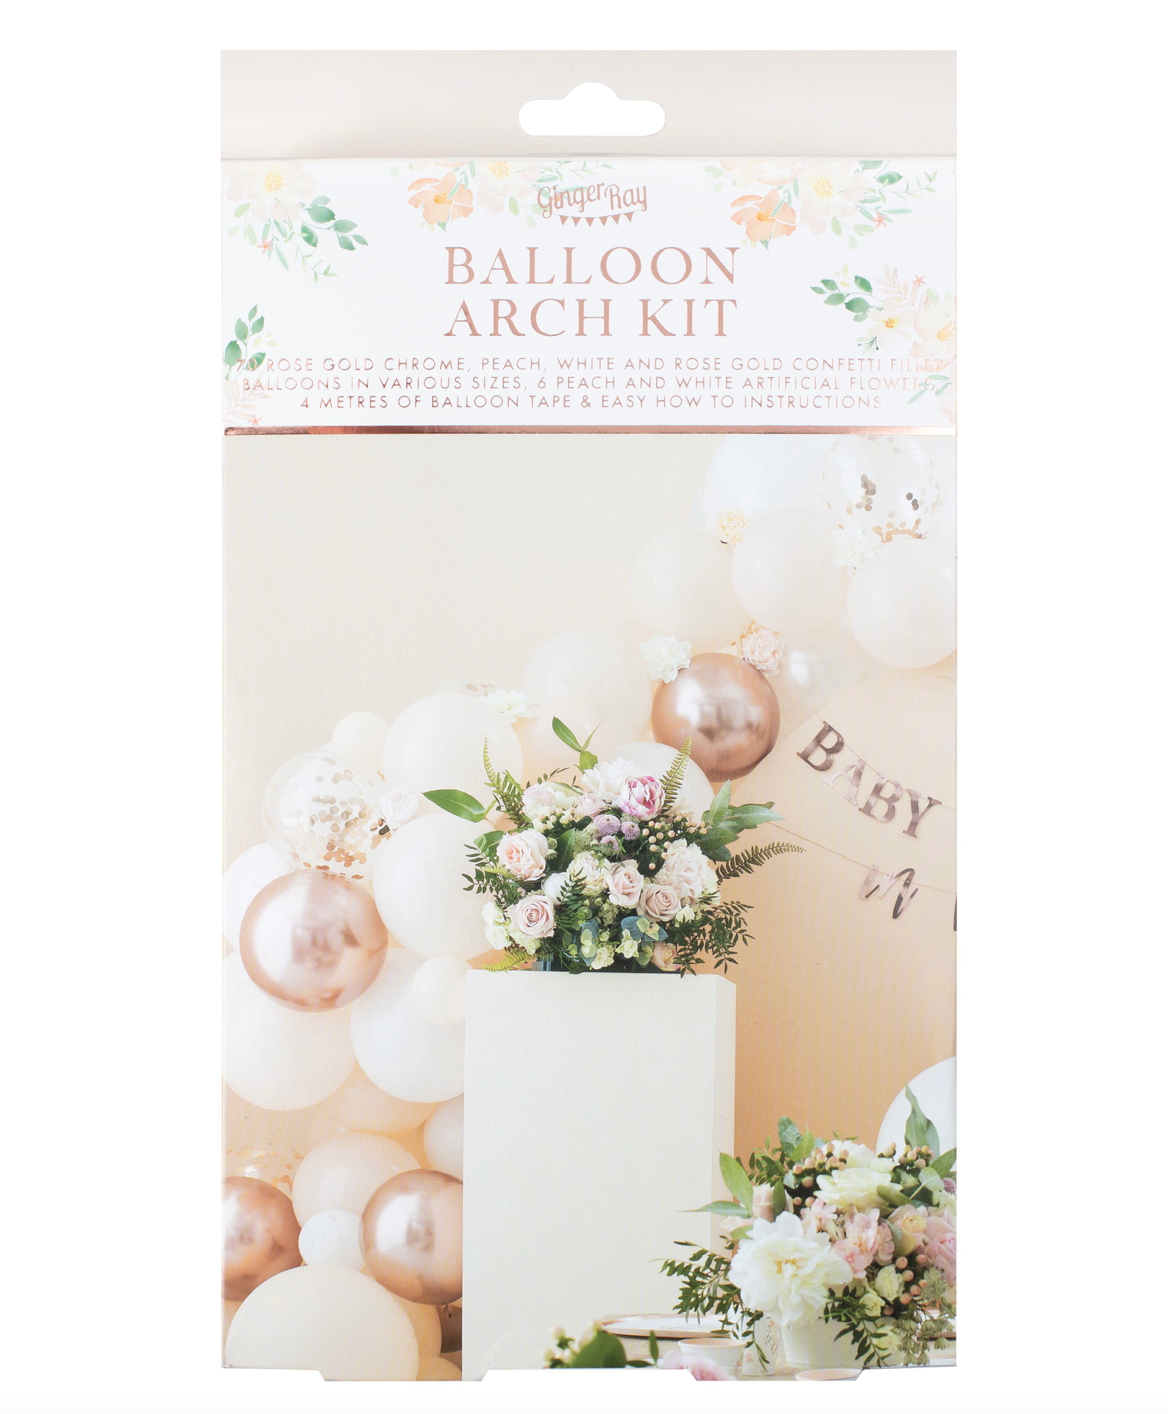 Peach, White and Rose Gold Balloon Arch